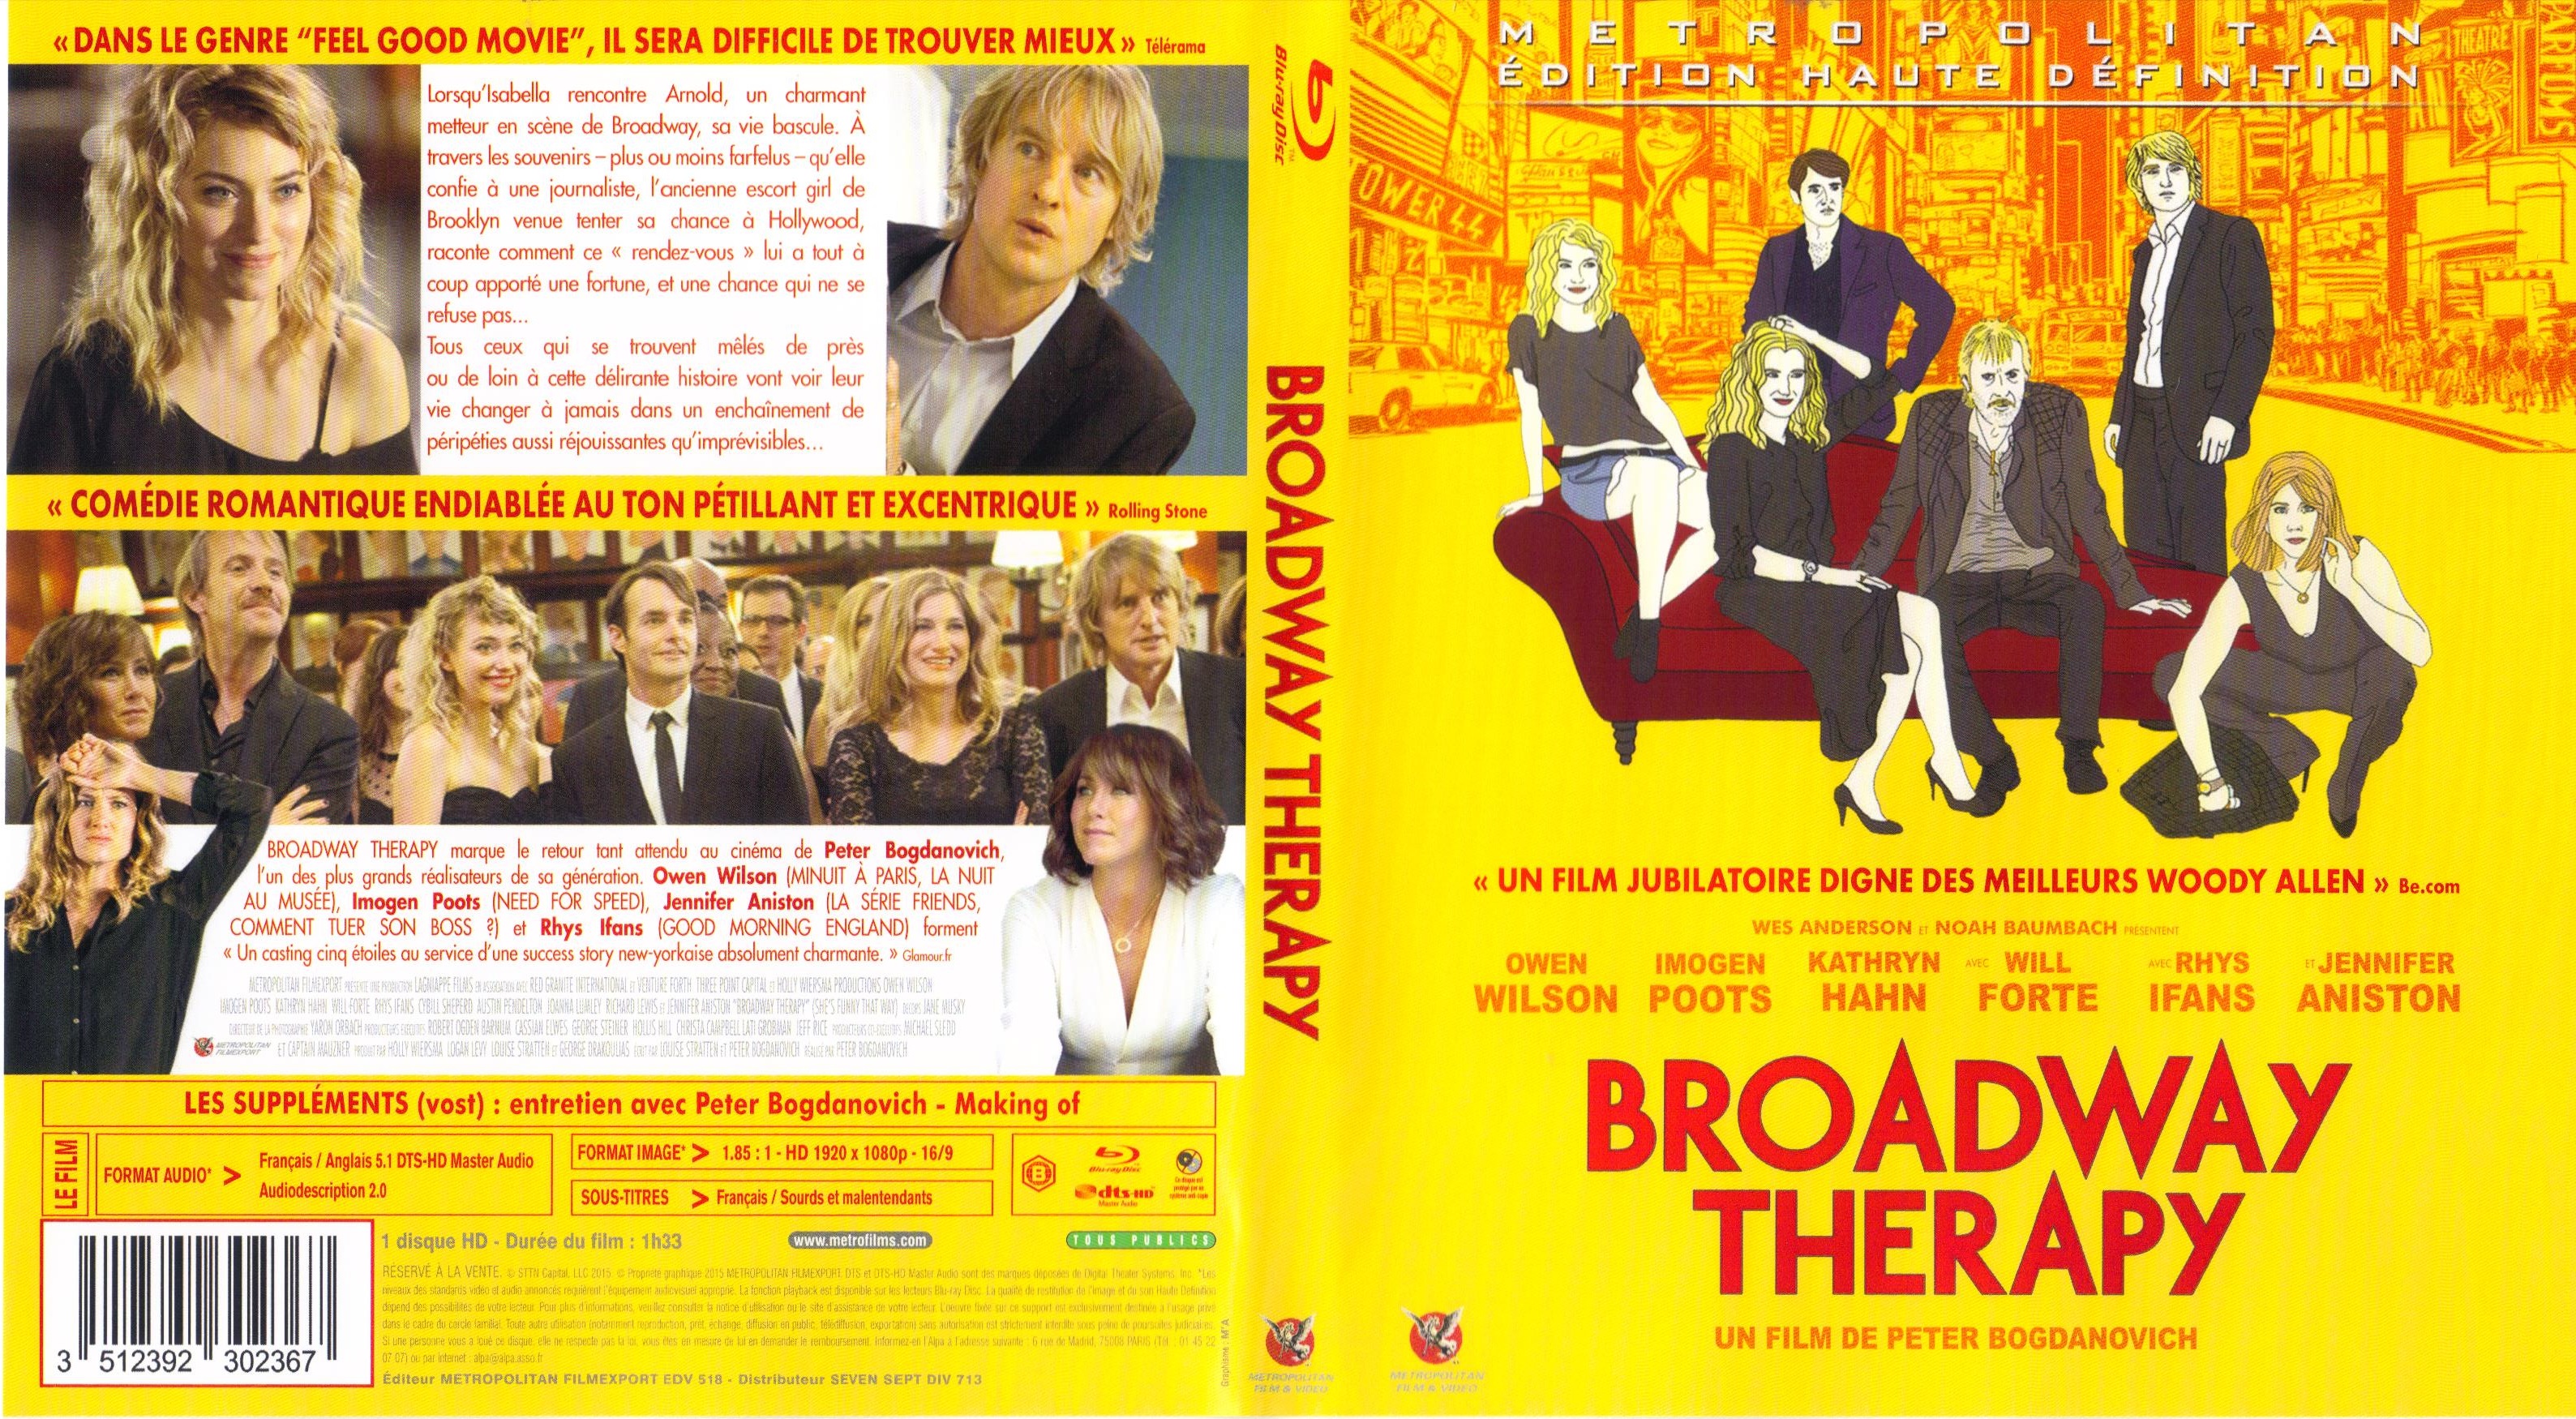 Jaquette DVD Broadway Therapy (BLU-RAY)